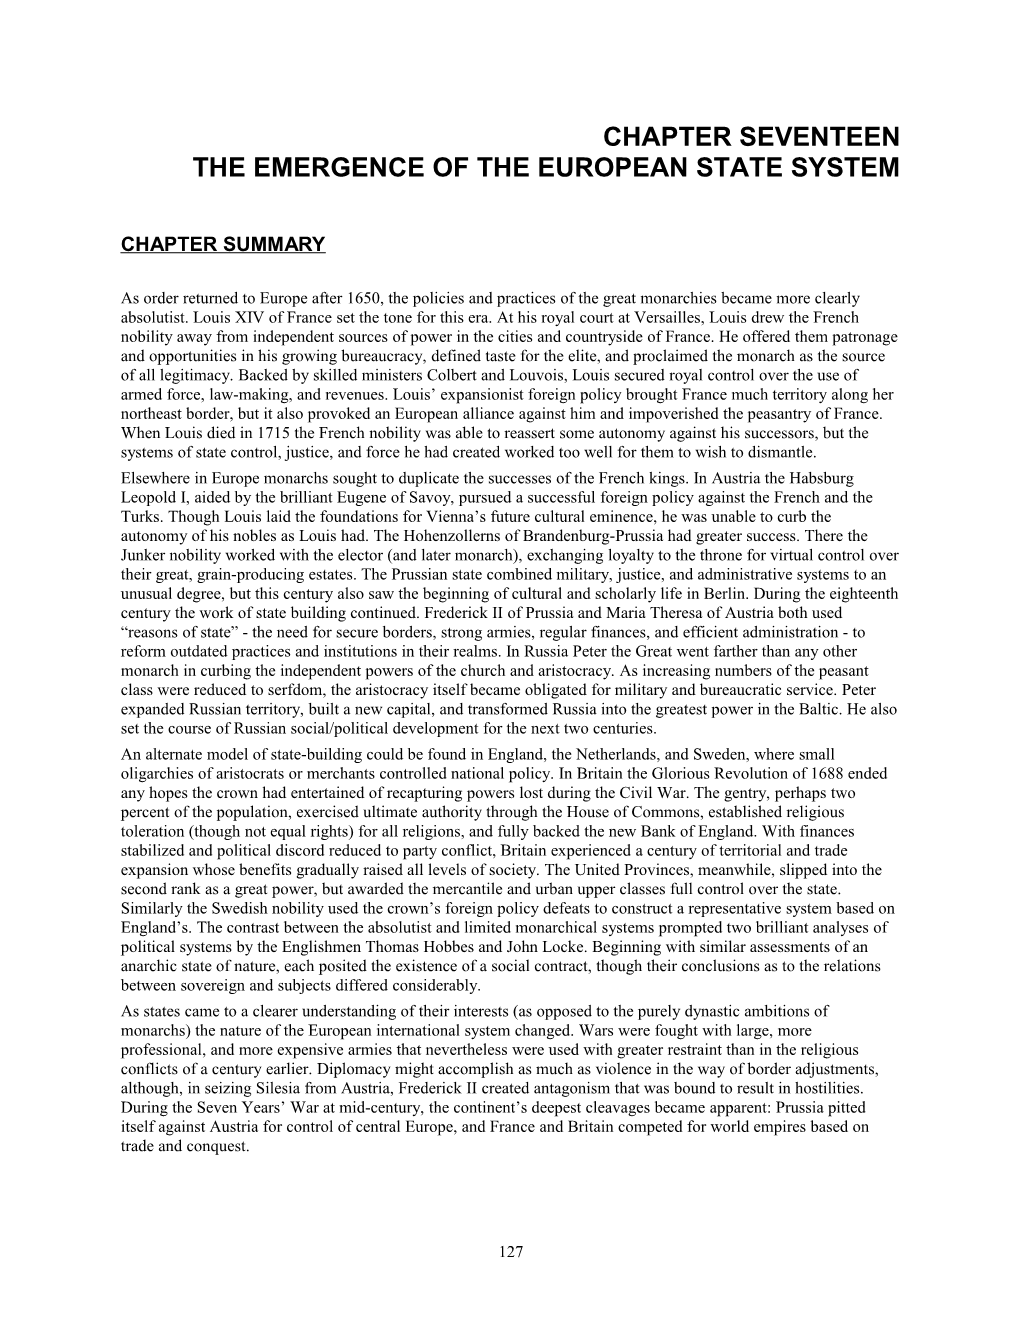 The Emergence of the European State System